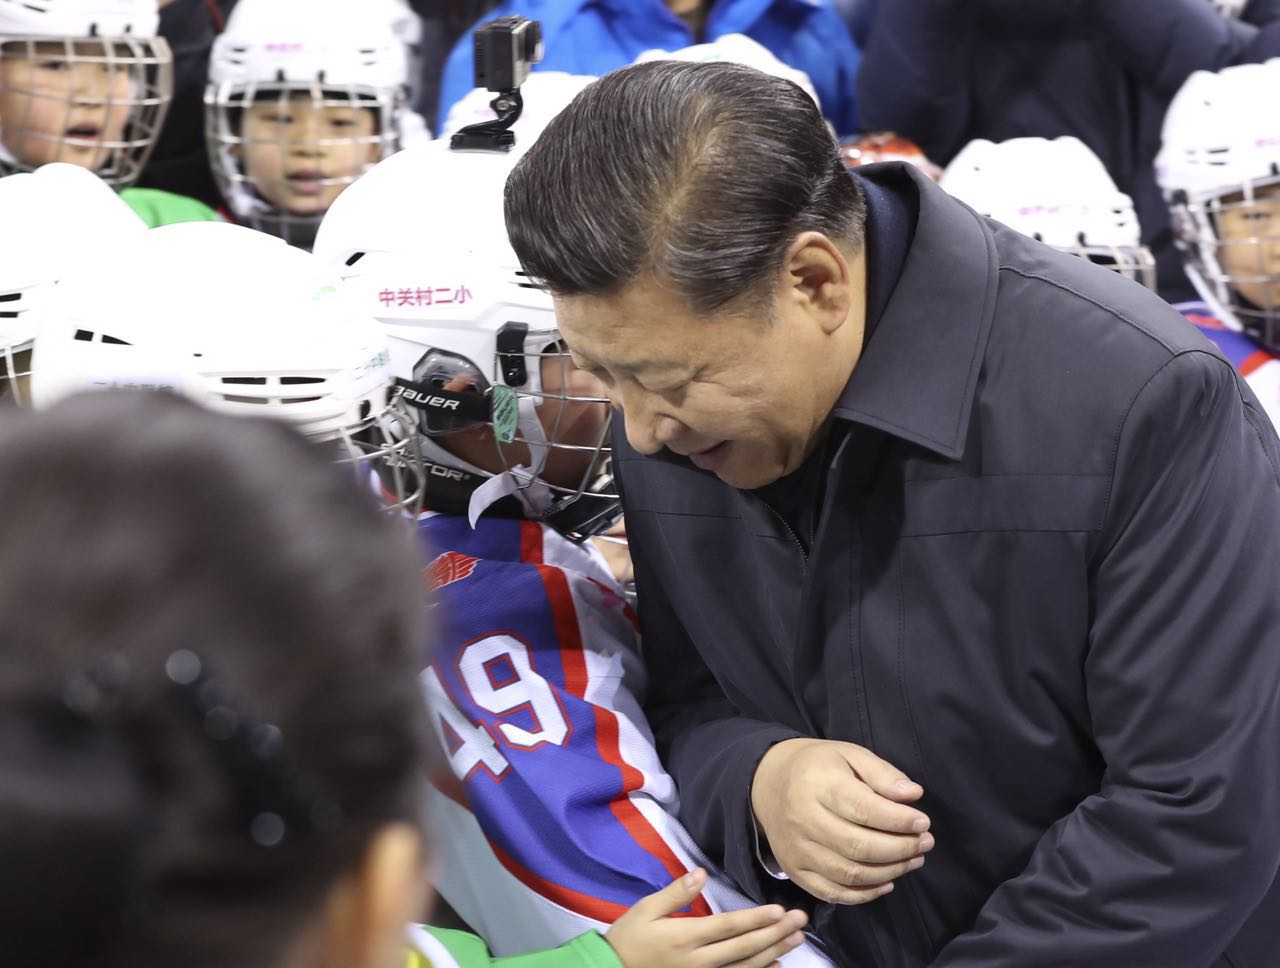 Chinese President Xi Jinping encourages ice hockey and skating fans at a sports center in Beijing, capital of China, Feb. 24, 2017. [Photo: Xinhua/Lan Hongguang]